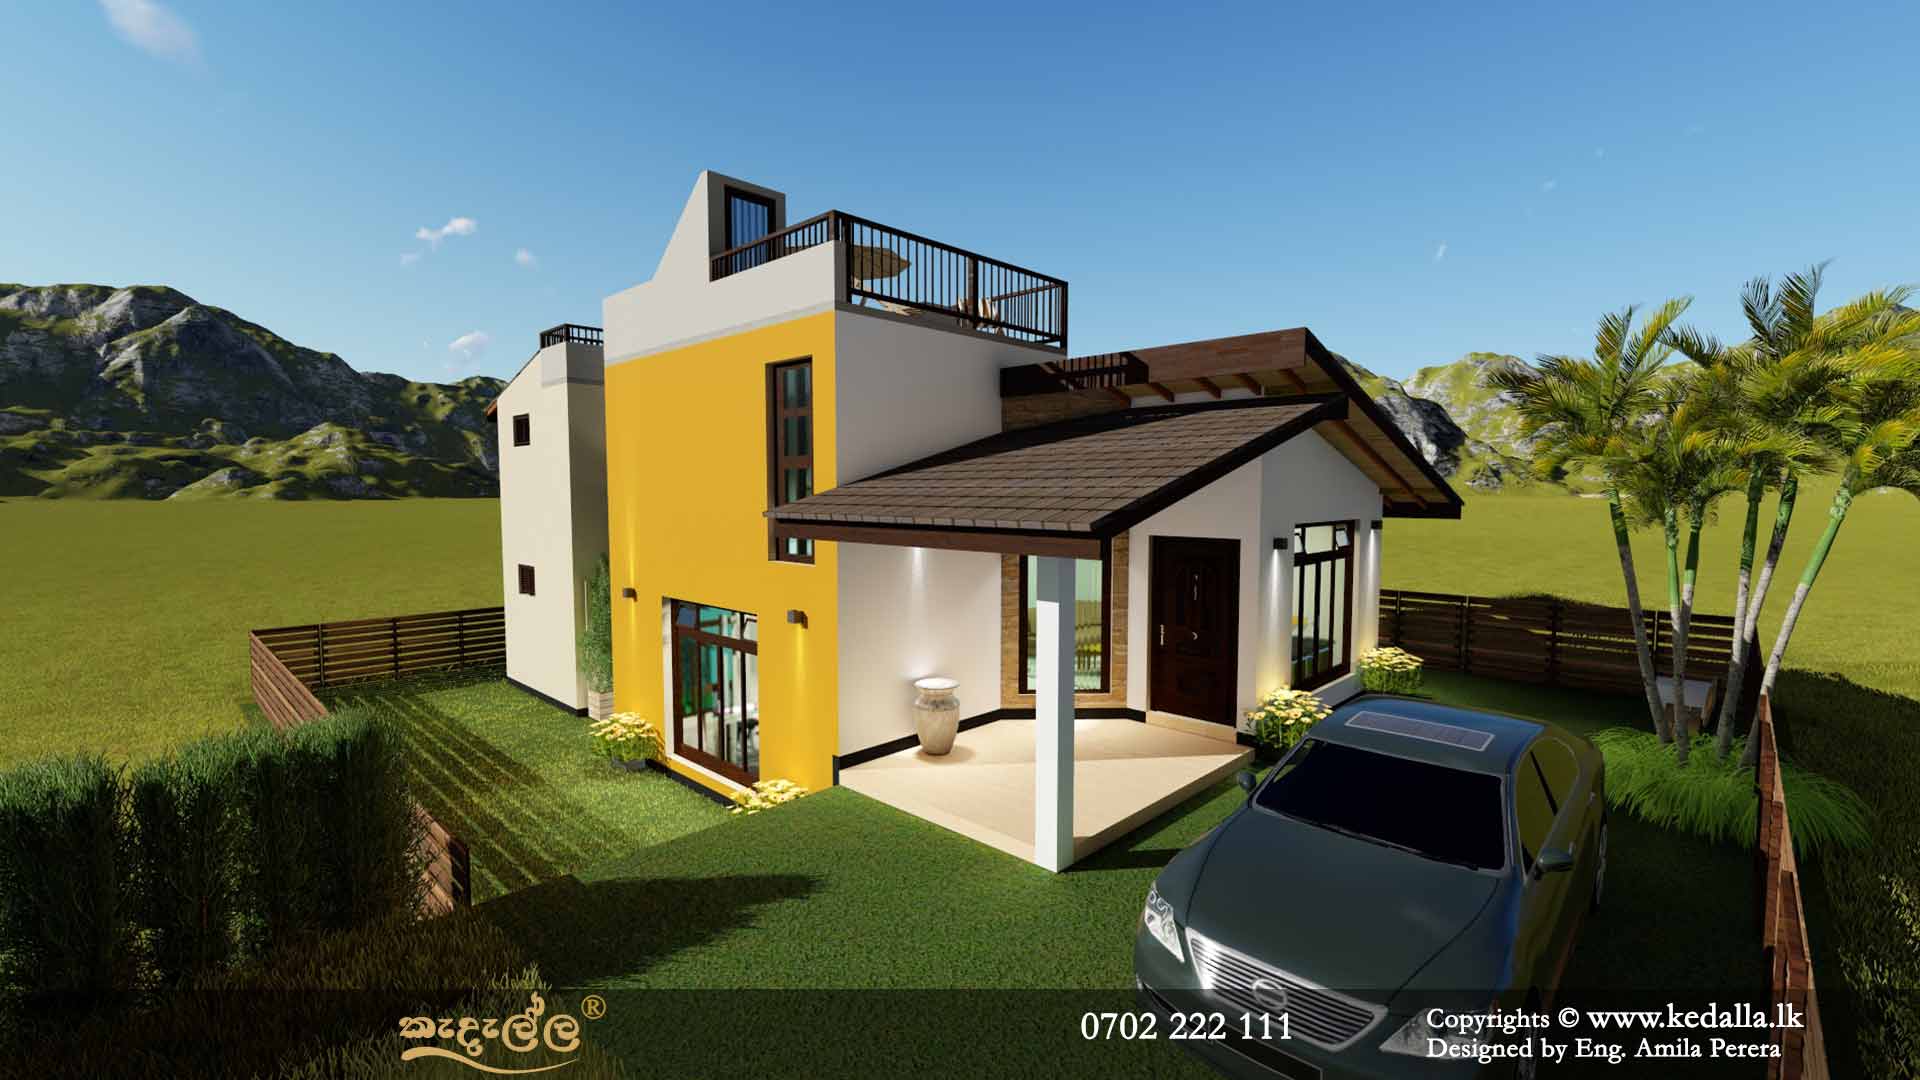 5 Bedroom Box Model House Designs done by Top Architects for Sale in Sri Lanka